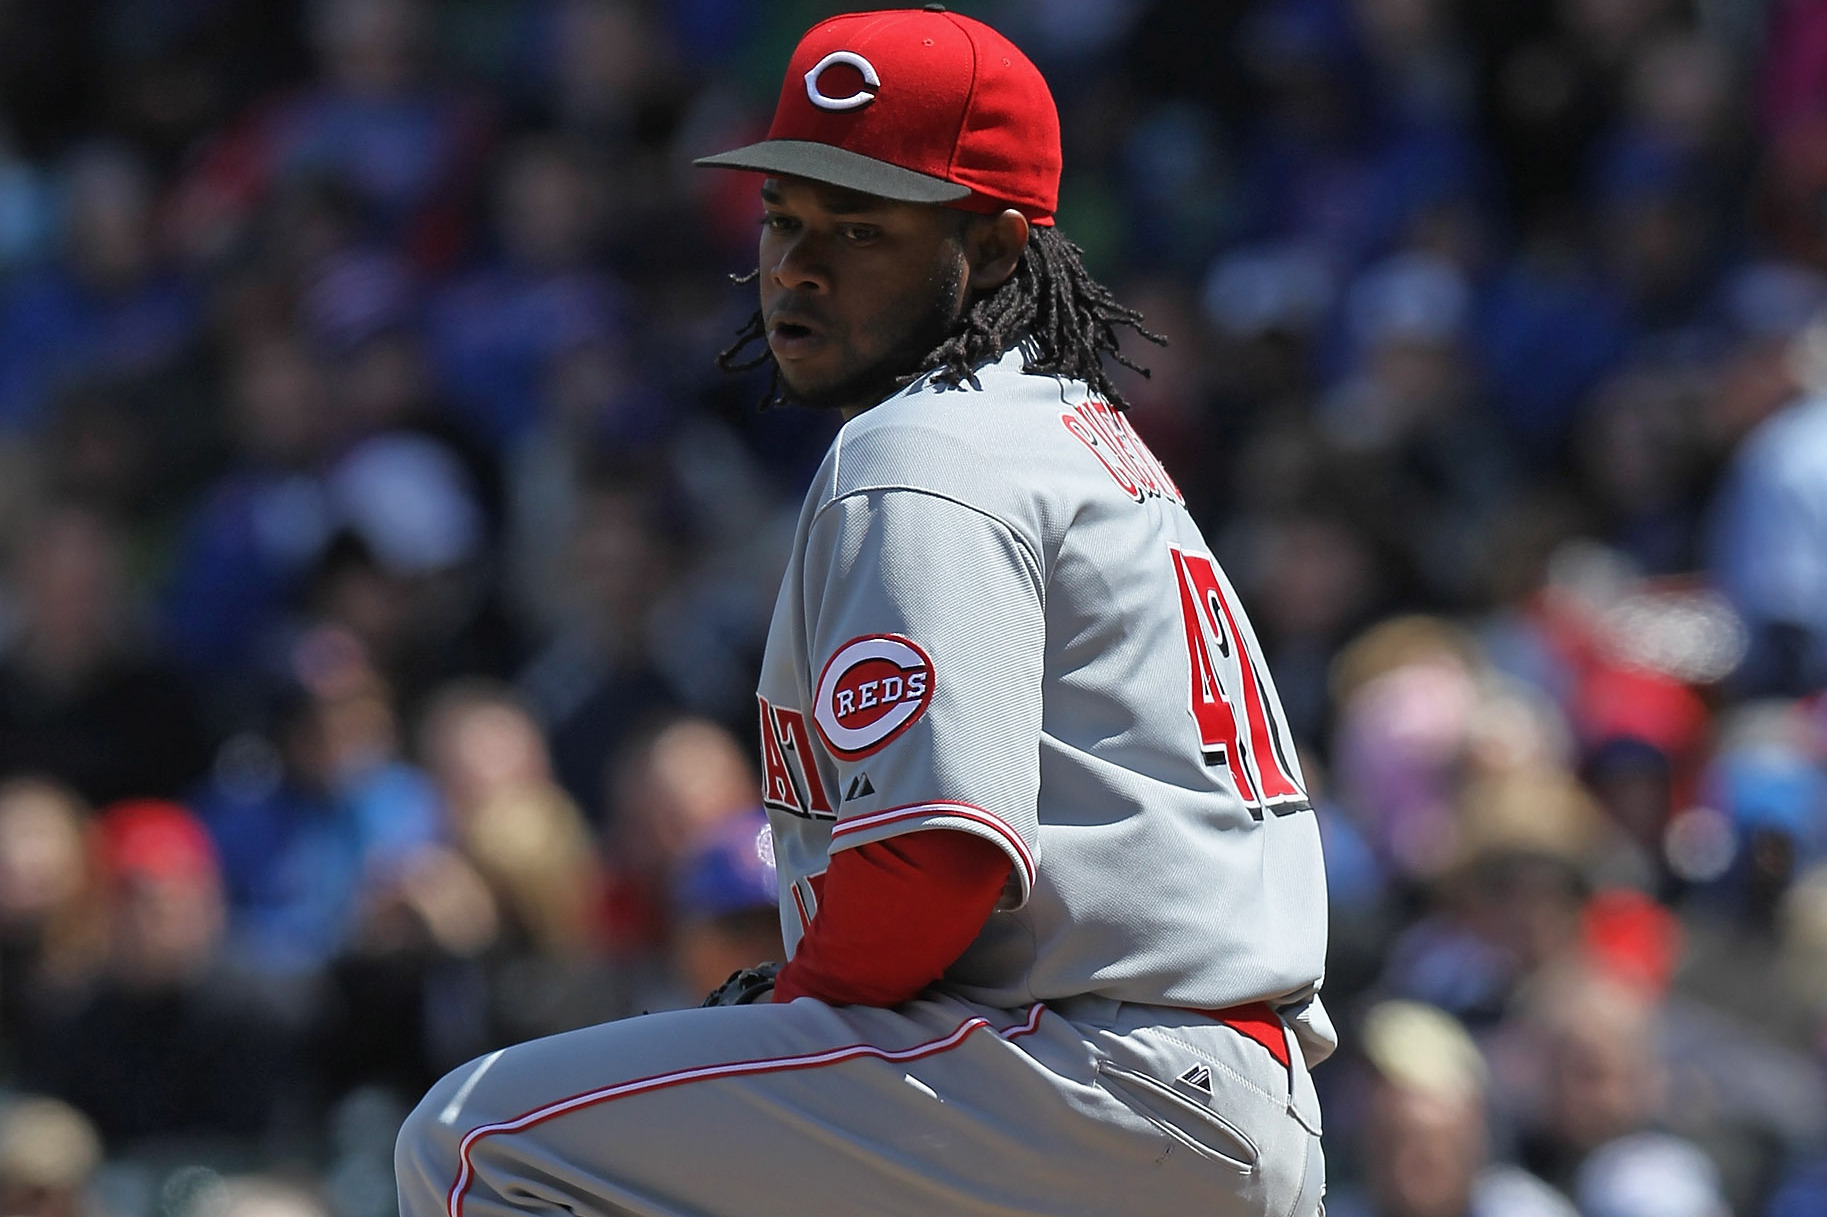 Reds 7, Indians 1: Johnny Cueto dominates in complete-game victory for Reds